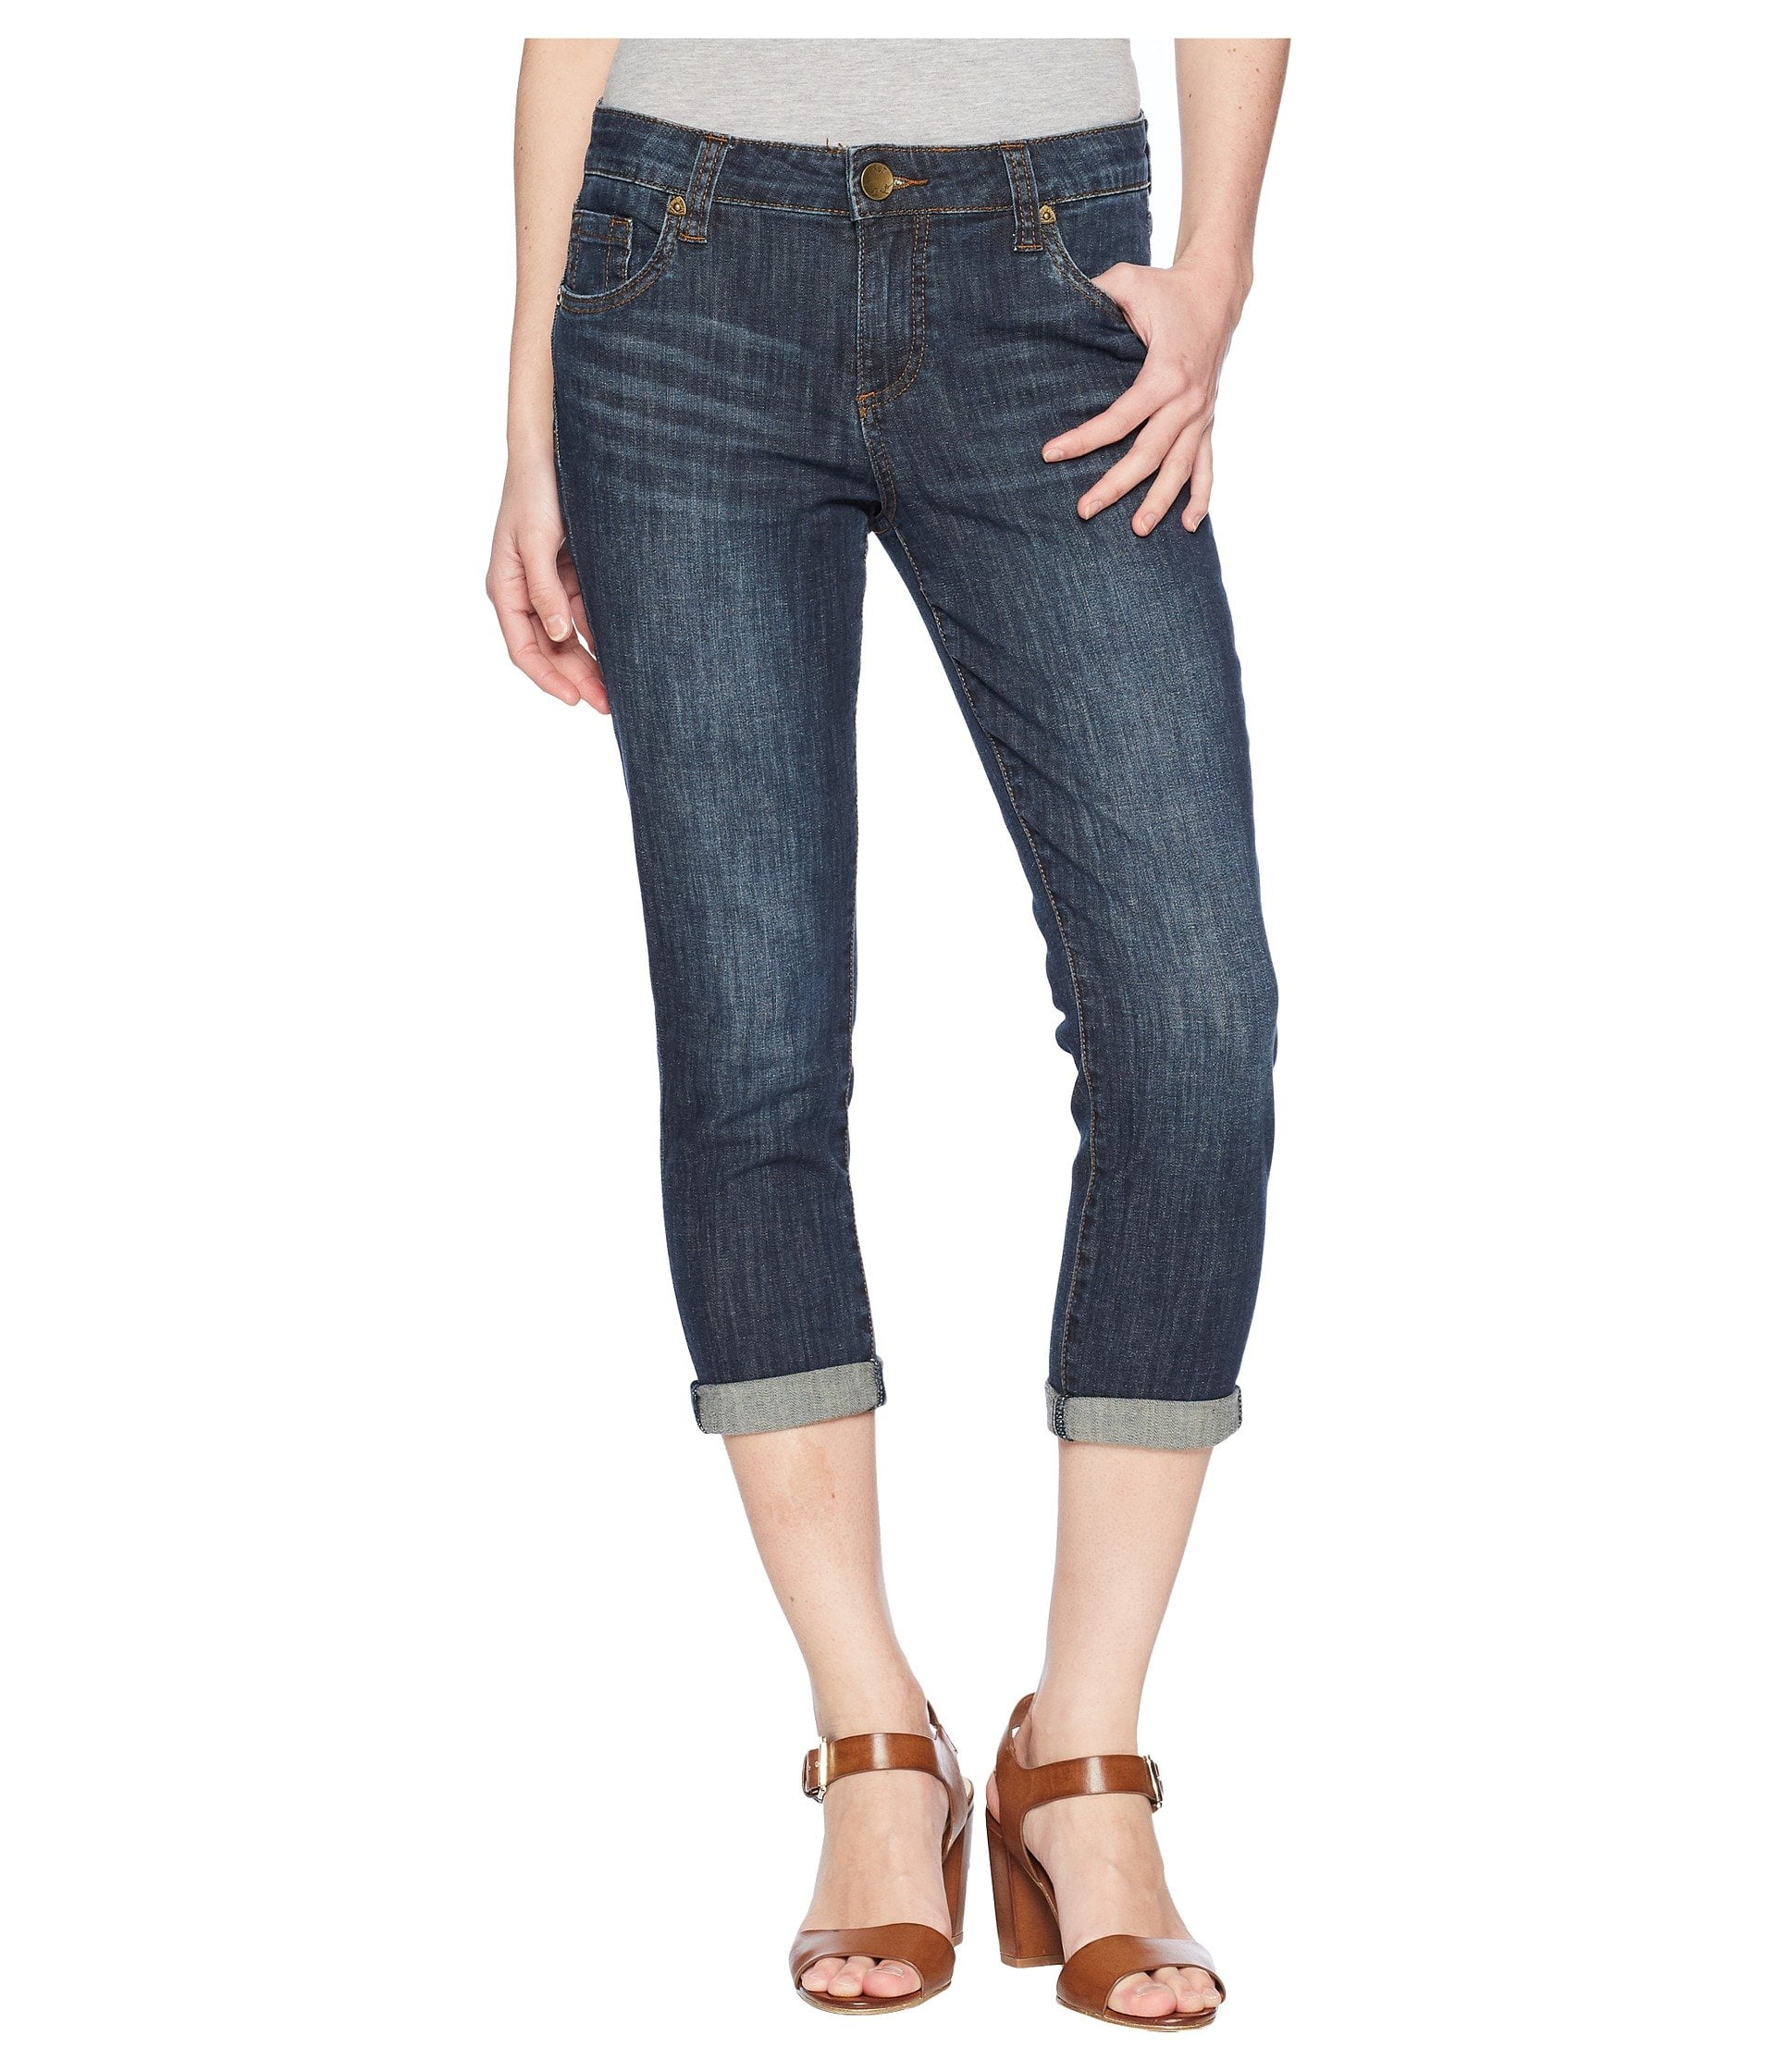 Kut from the Kloth - Maggie Cropped Skinny Jeans - Petite - 8P ...